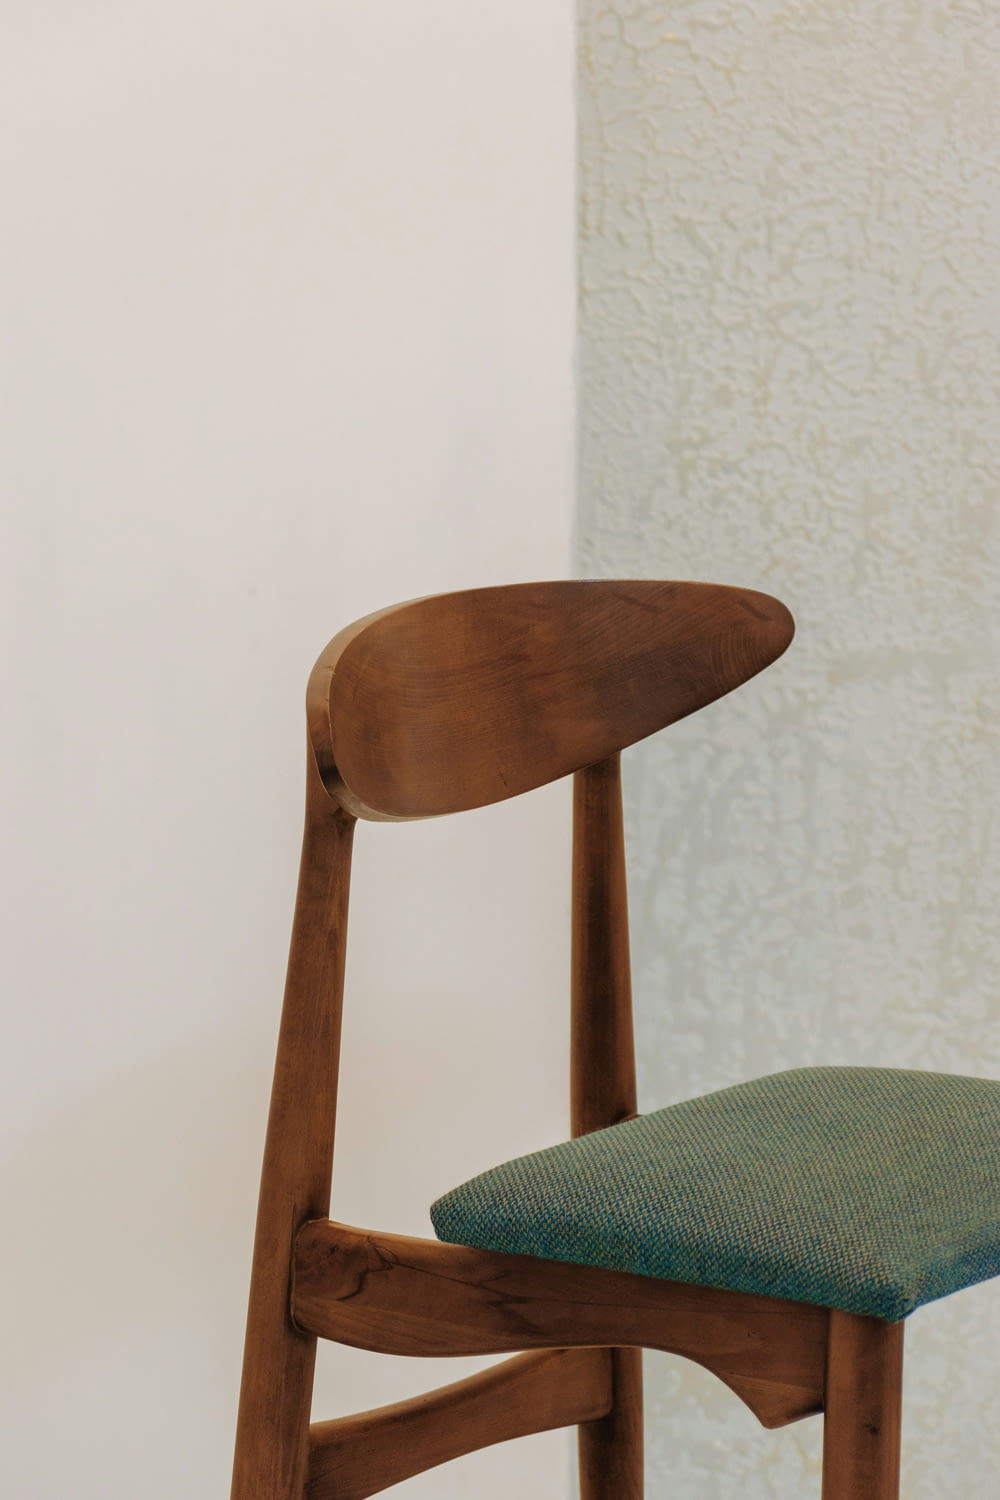 a wooden chair with a green seat cushion